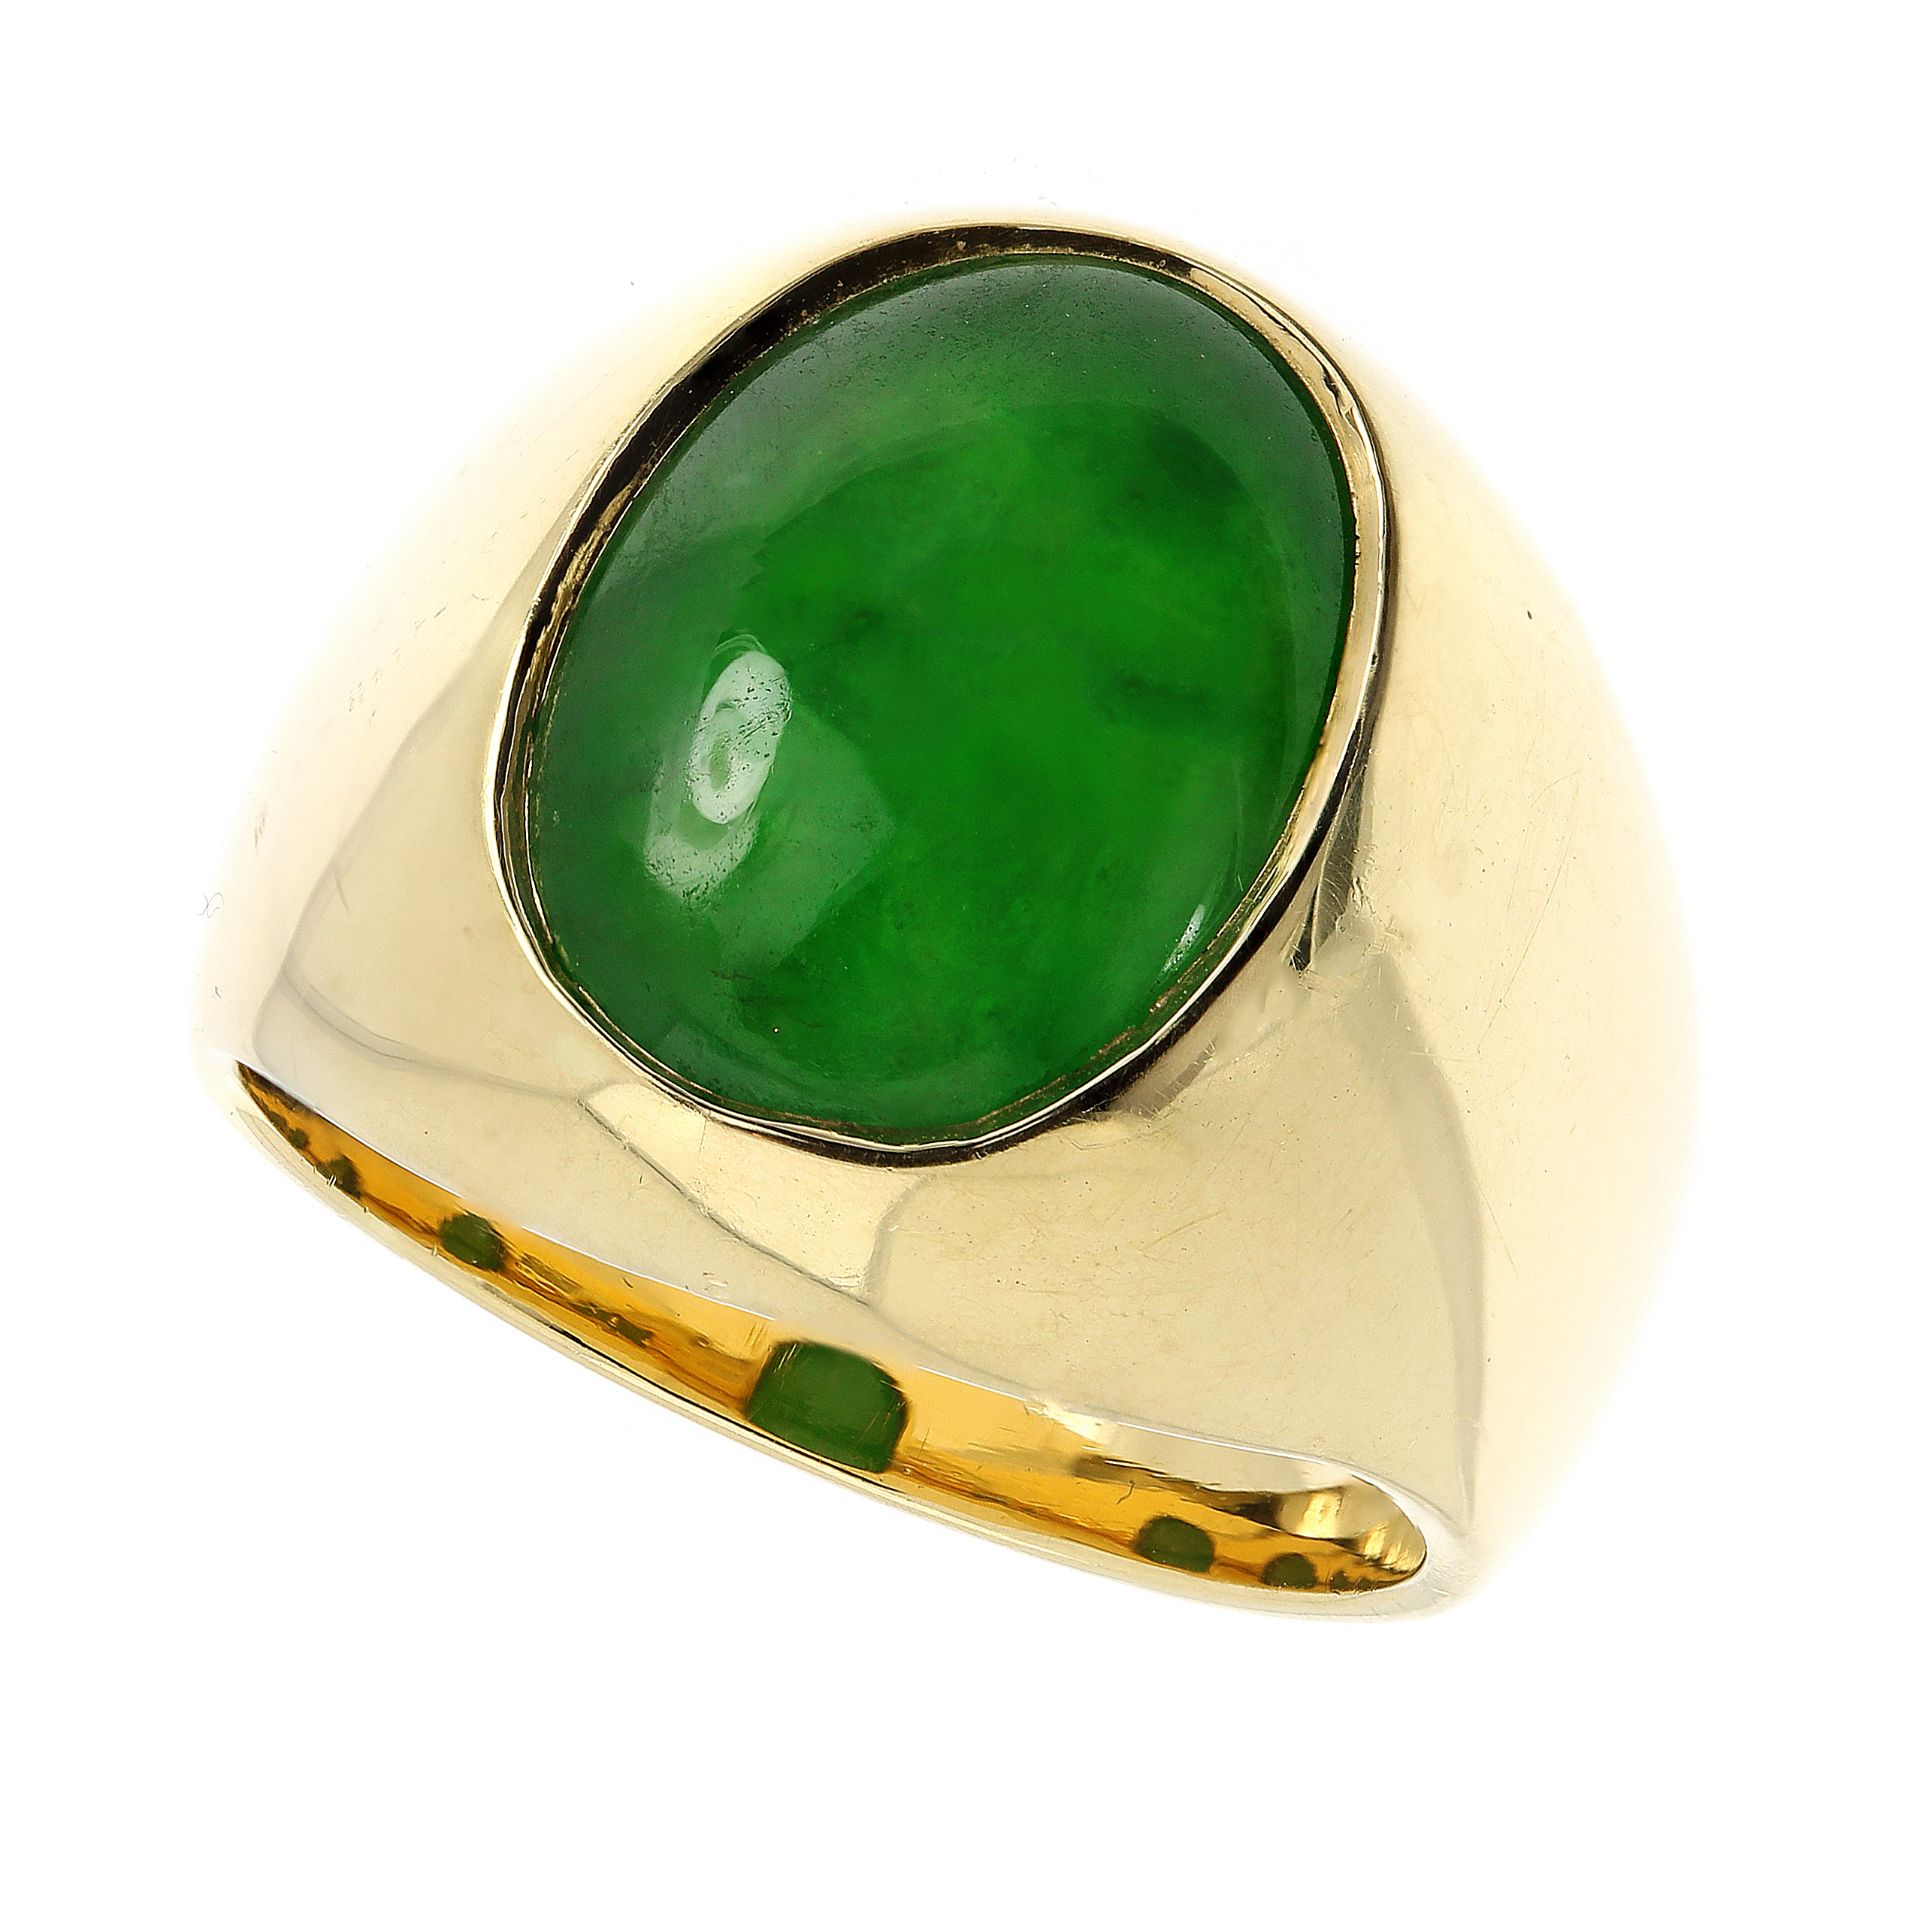 A JADEITE JADE DRESS RING in 18ct yellow gold, set with a large oval cabochon piece of jade of